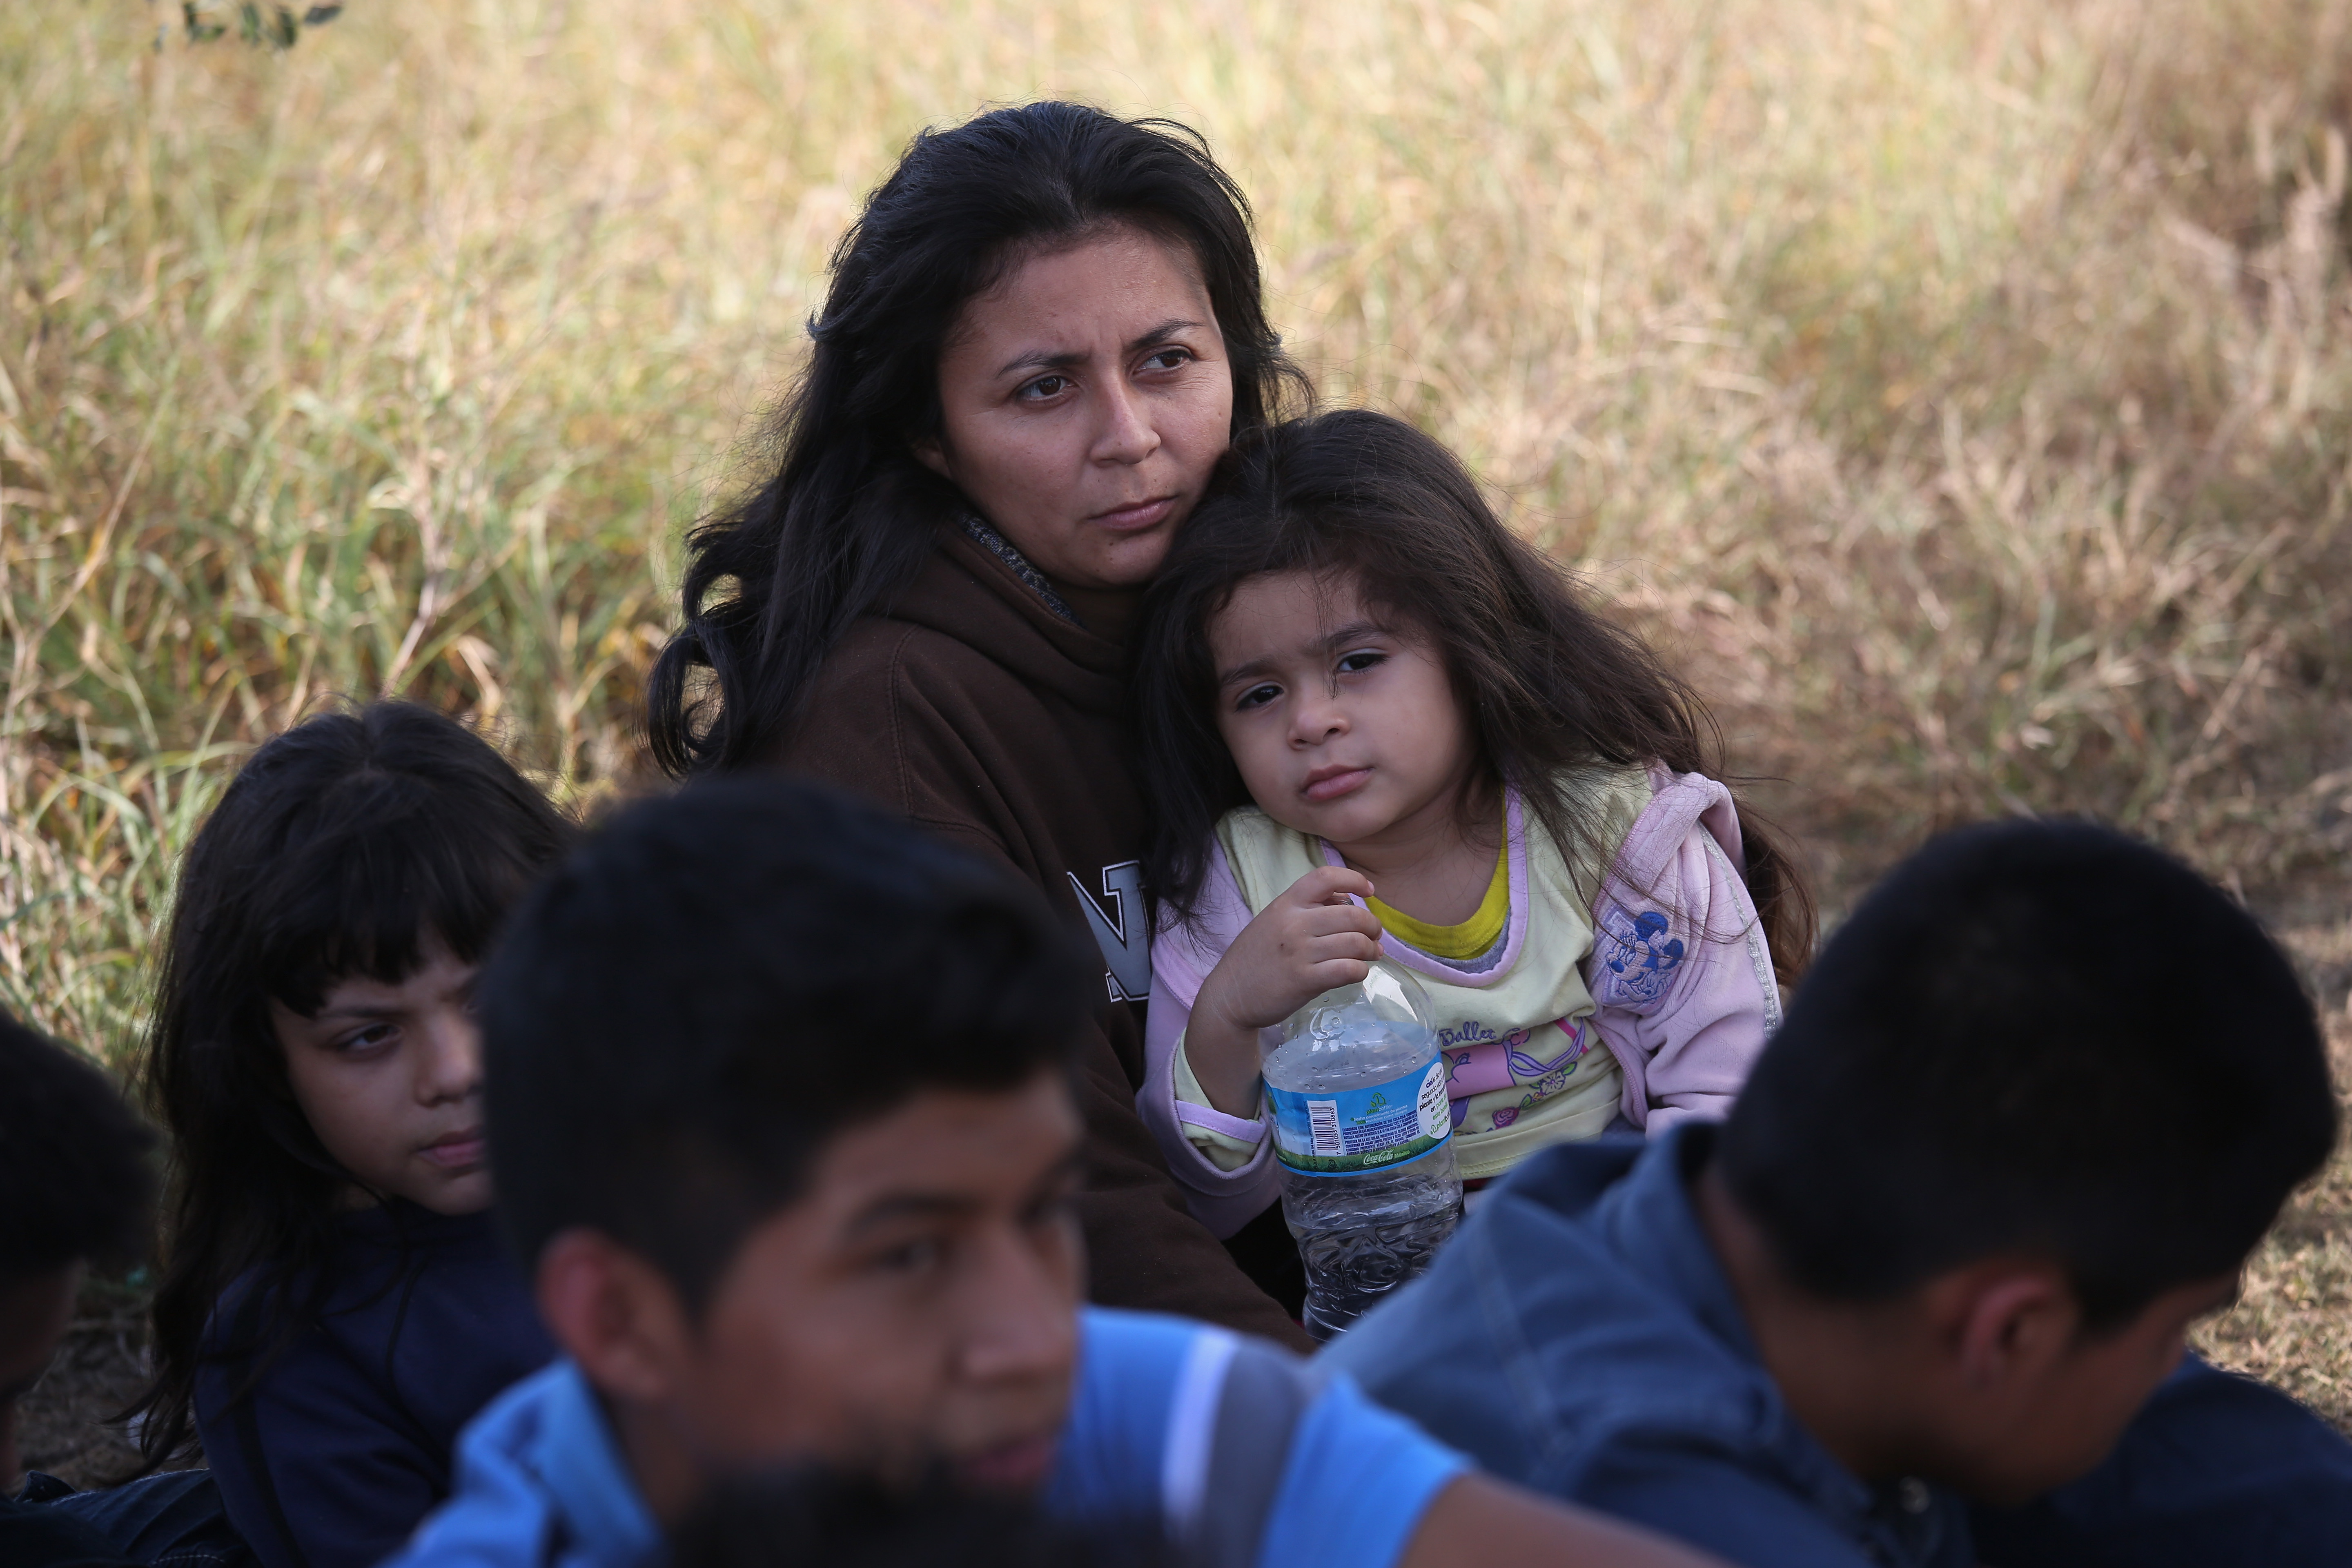 U.S. plans to deport some immigrant families who crossed southern border - CBS News5760 x 3840